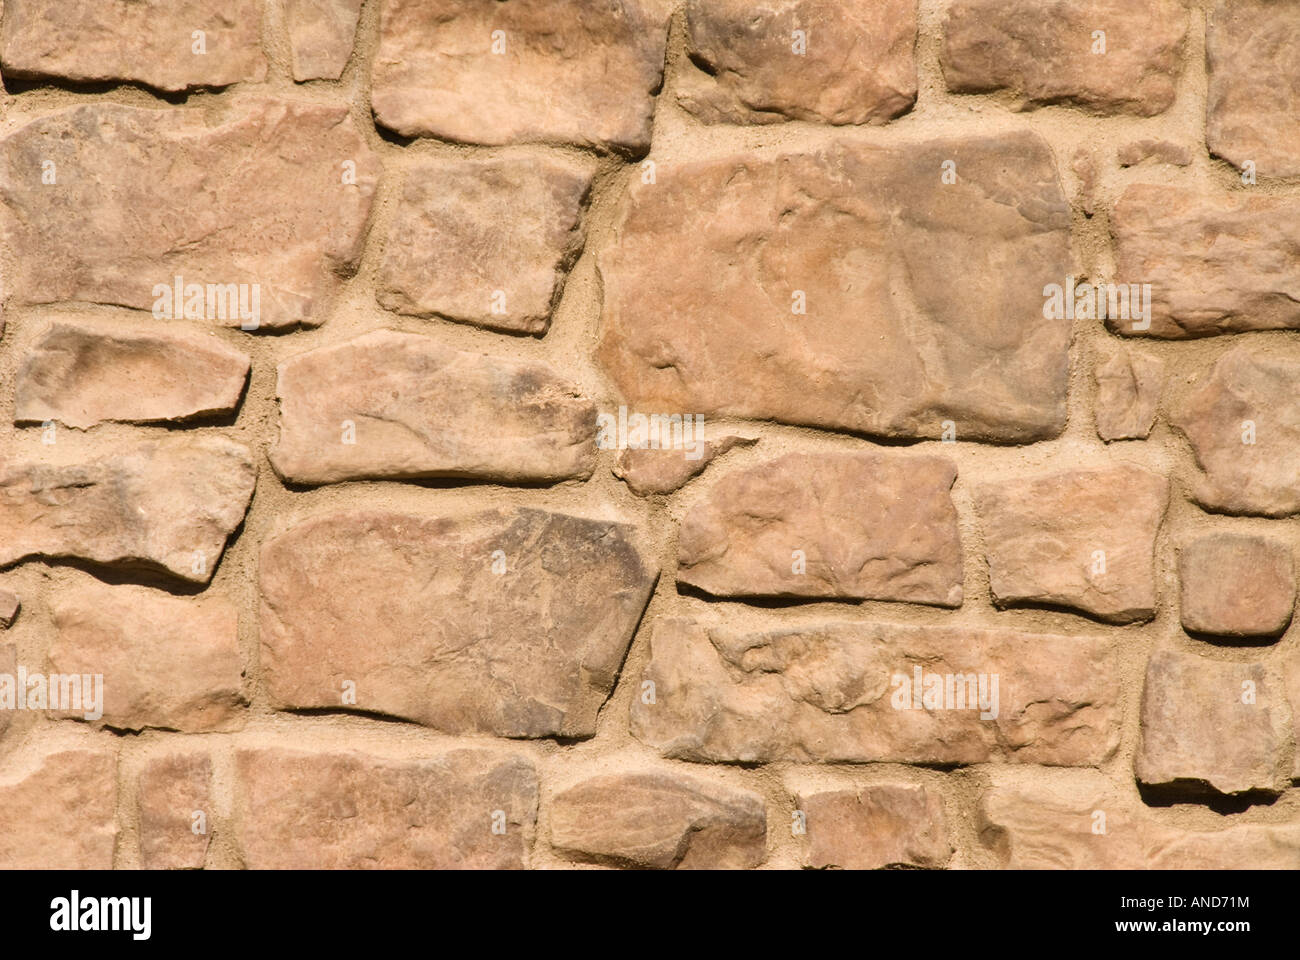 New tile finish work shows the attractive detail of this stone brickwork Stock Photo